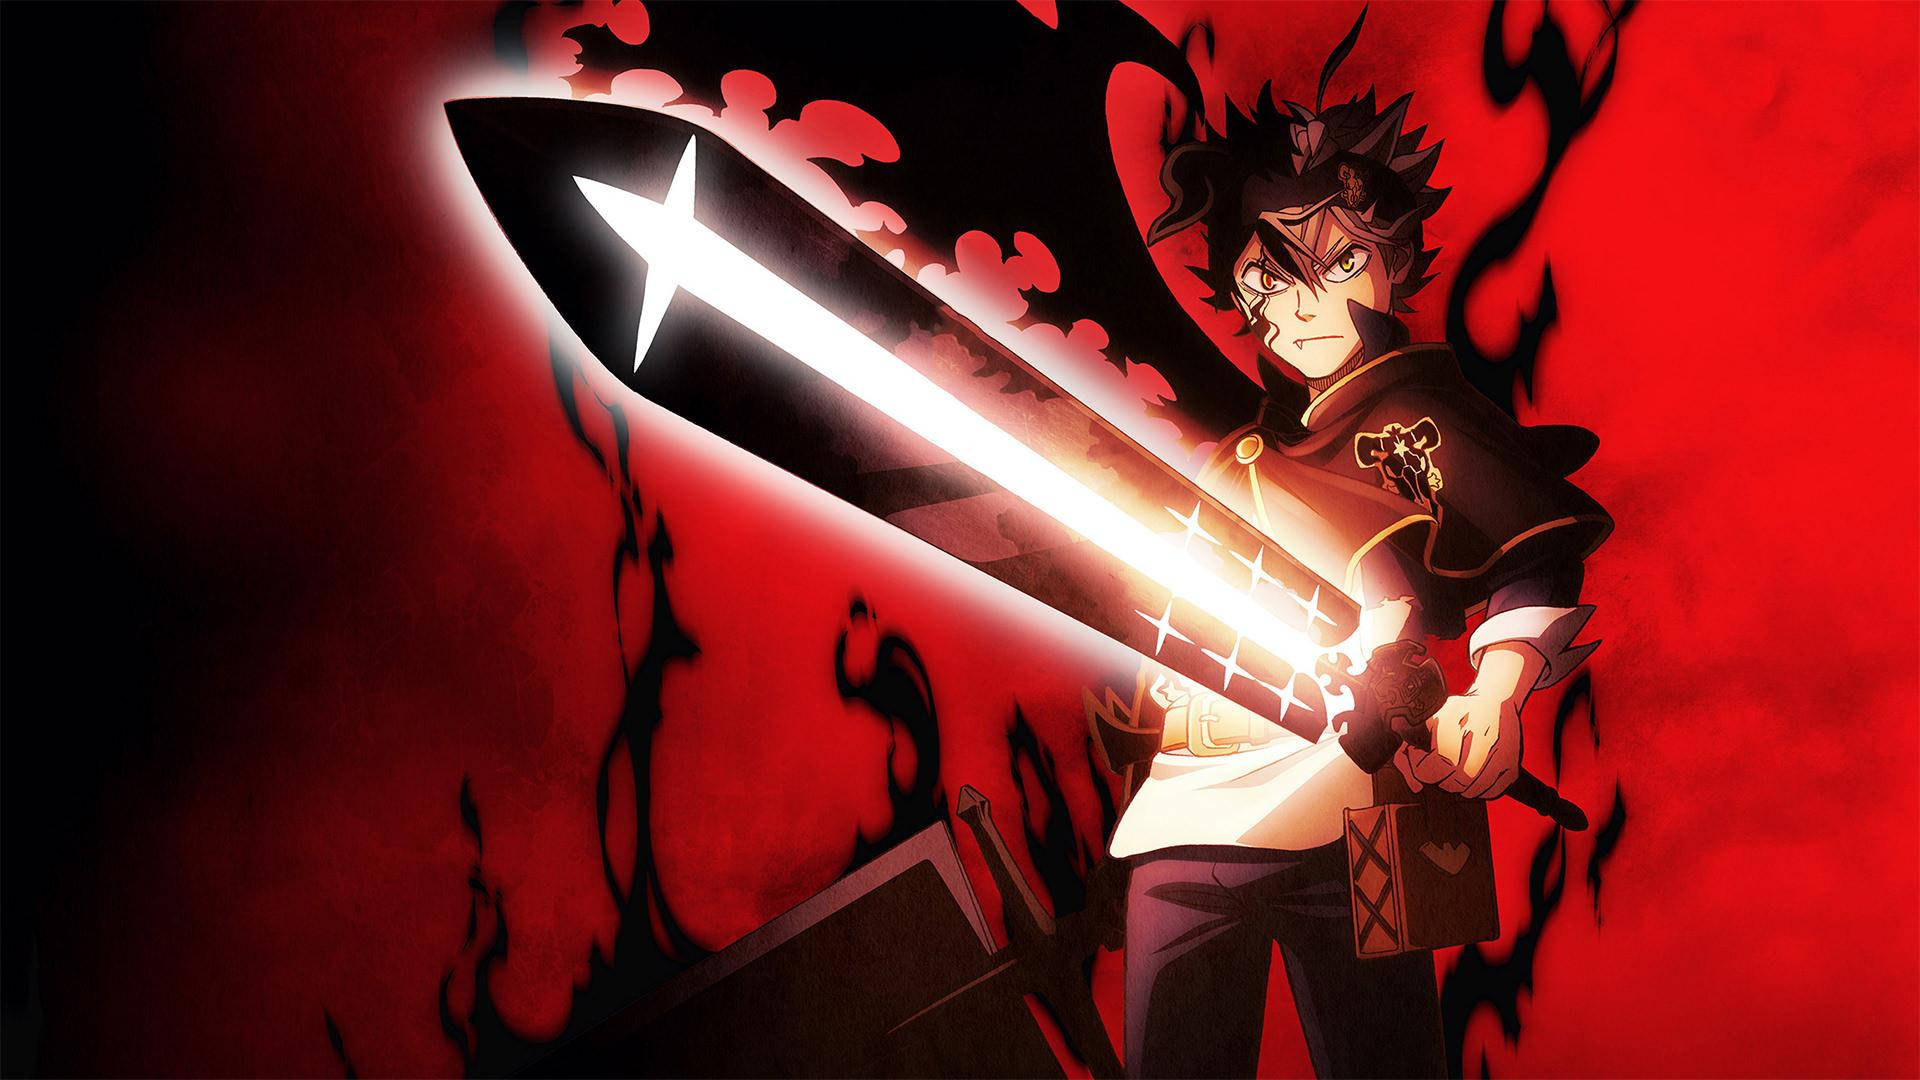 "Dedication and Strength of Asta from Black Clover." Wallpaper